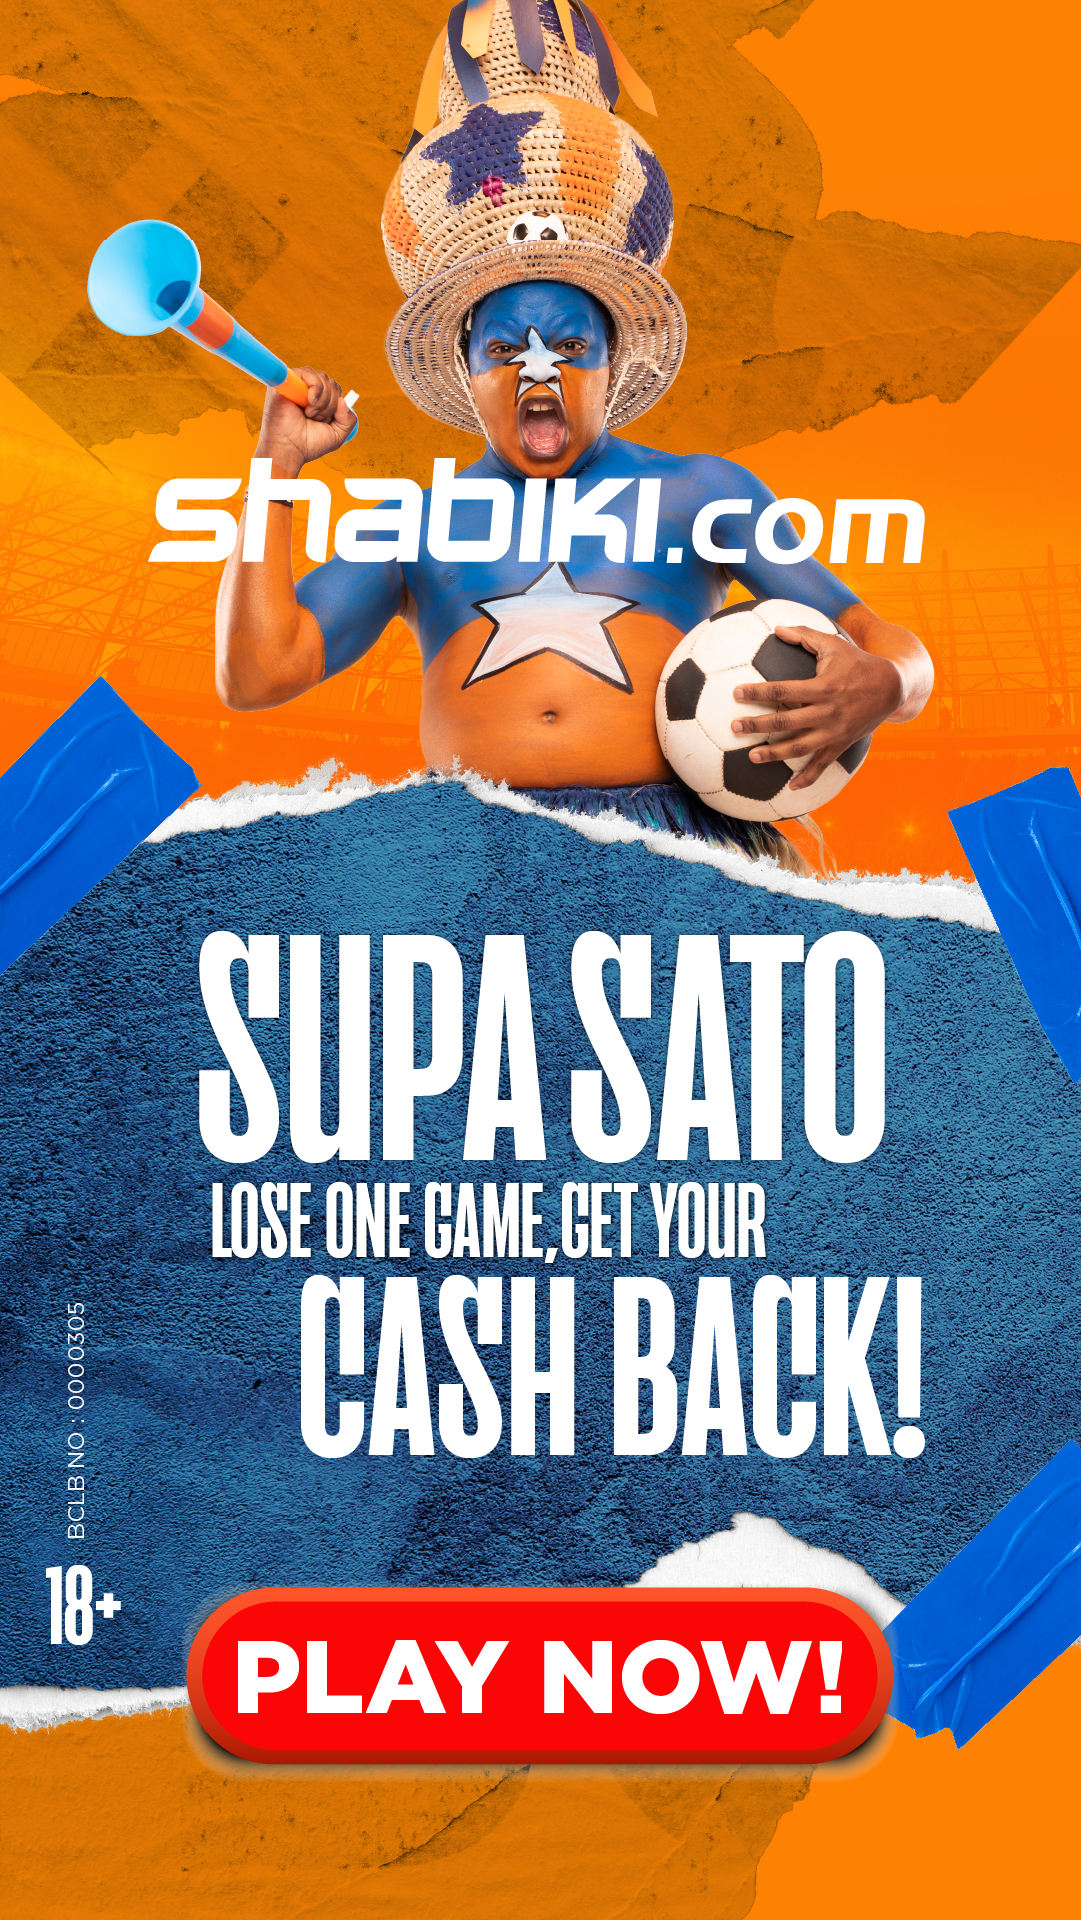 How Shabiki.com has spiced up the weekend with funky gaming promotions!